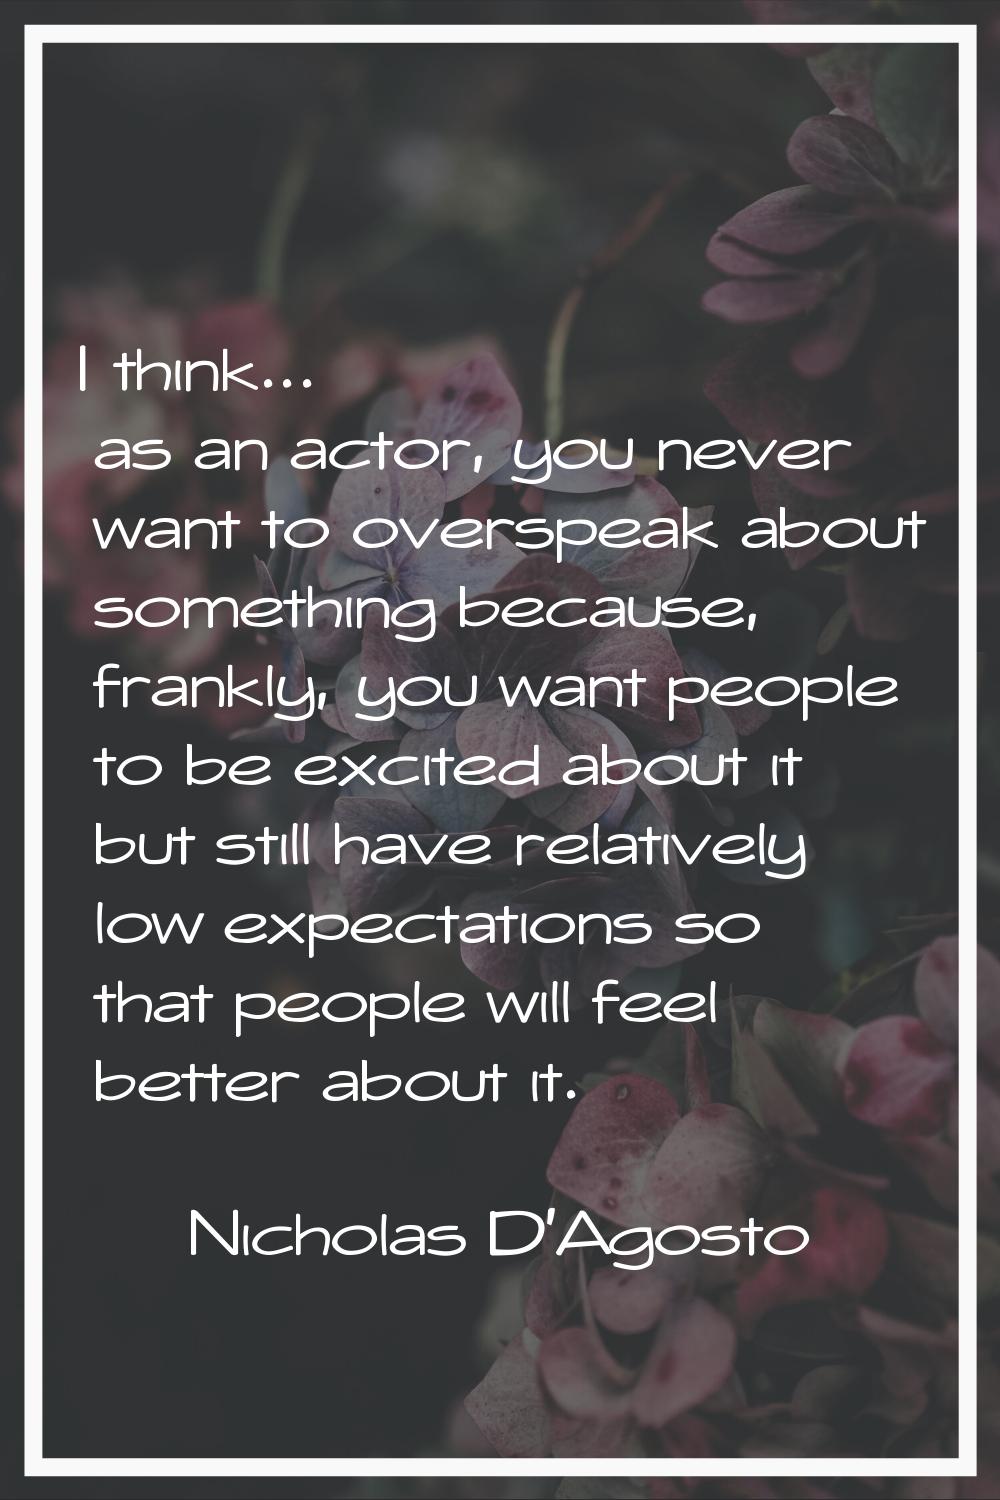 I think... as an actor, you never want to overspeak about something because, frankly, you want peop